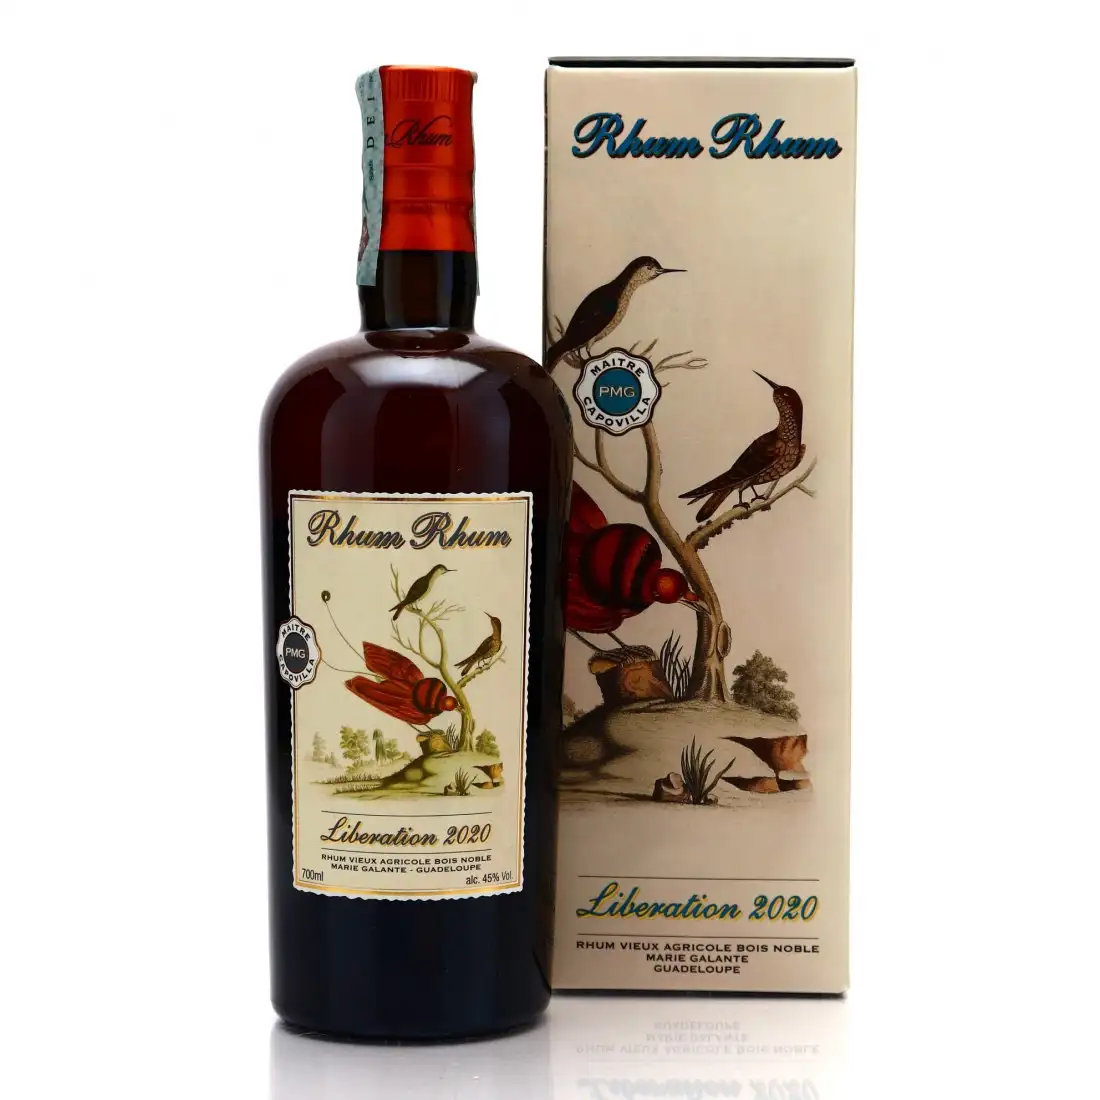 Image of the front of the bottle of the rum Rhum Rhum Libération 2020